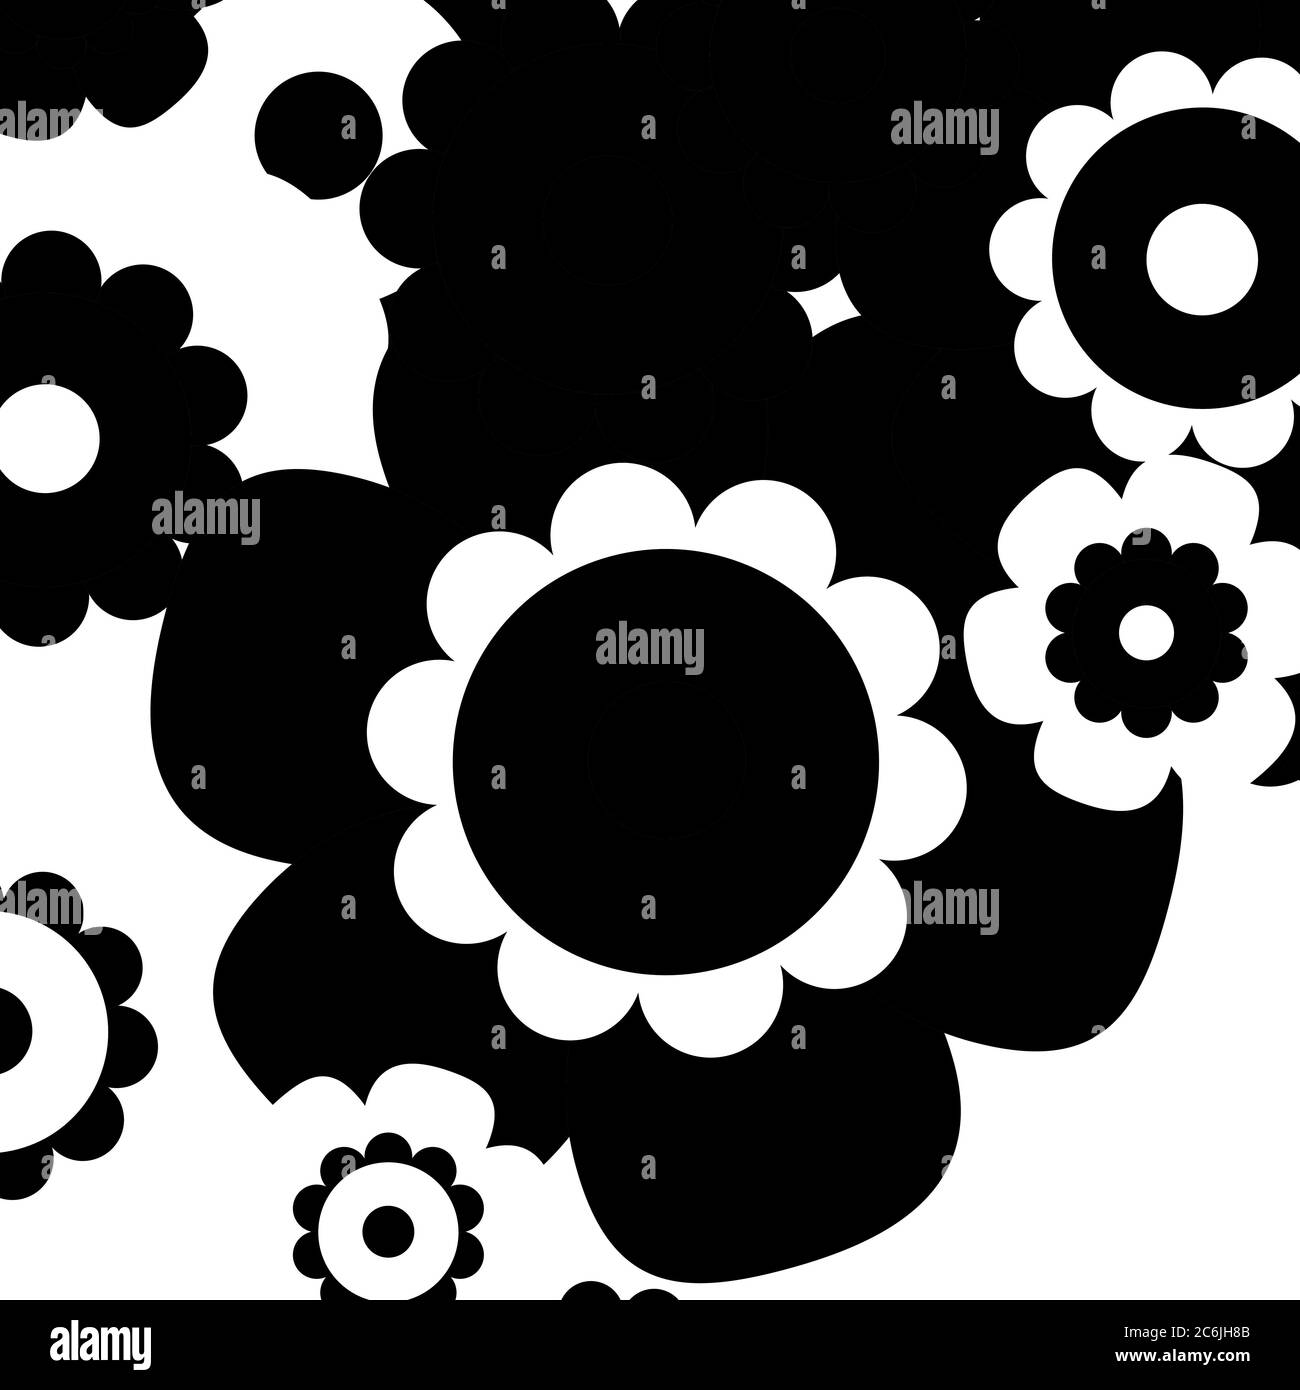 Black And White Abstract Simple Flower Bouquet Background Vector Illustration Stock Vector Image Art Alamy